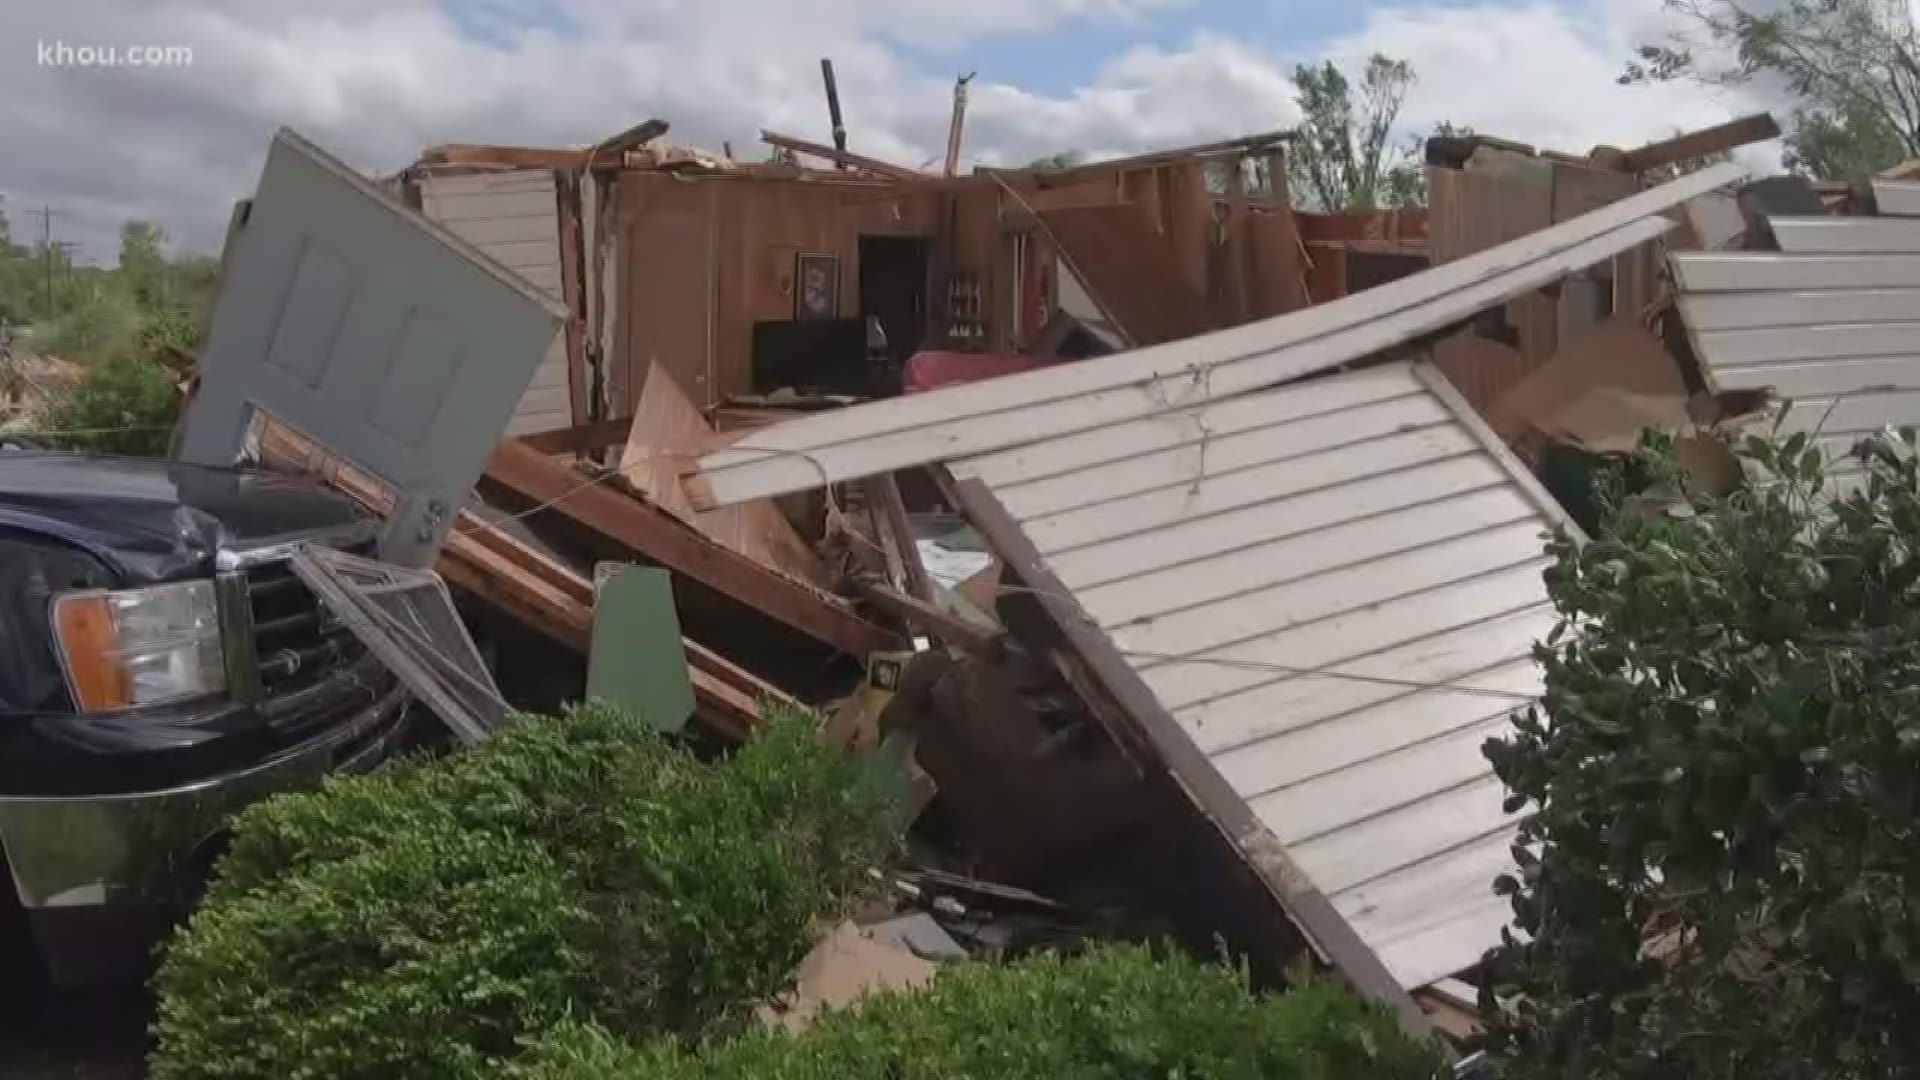 The National Weather Service says it was likely an EF-3 tornado that ripped through Franklin, Texas on Saturday.